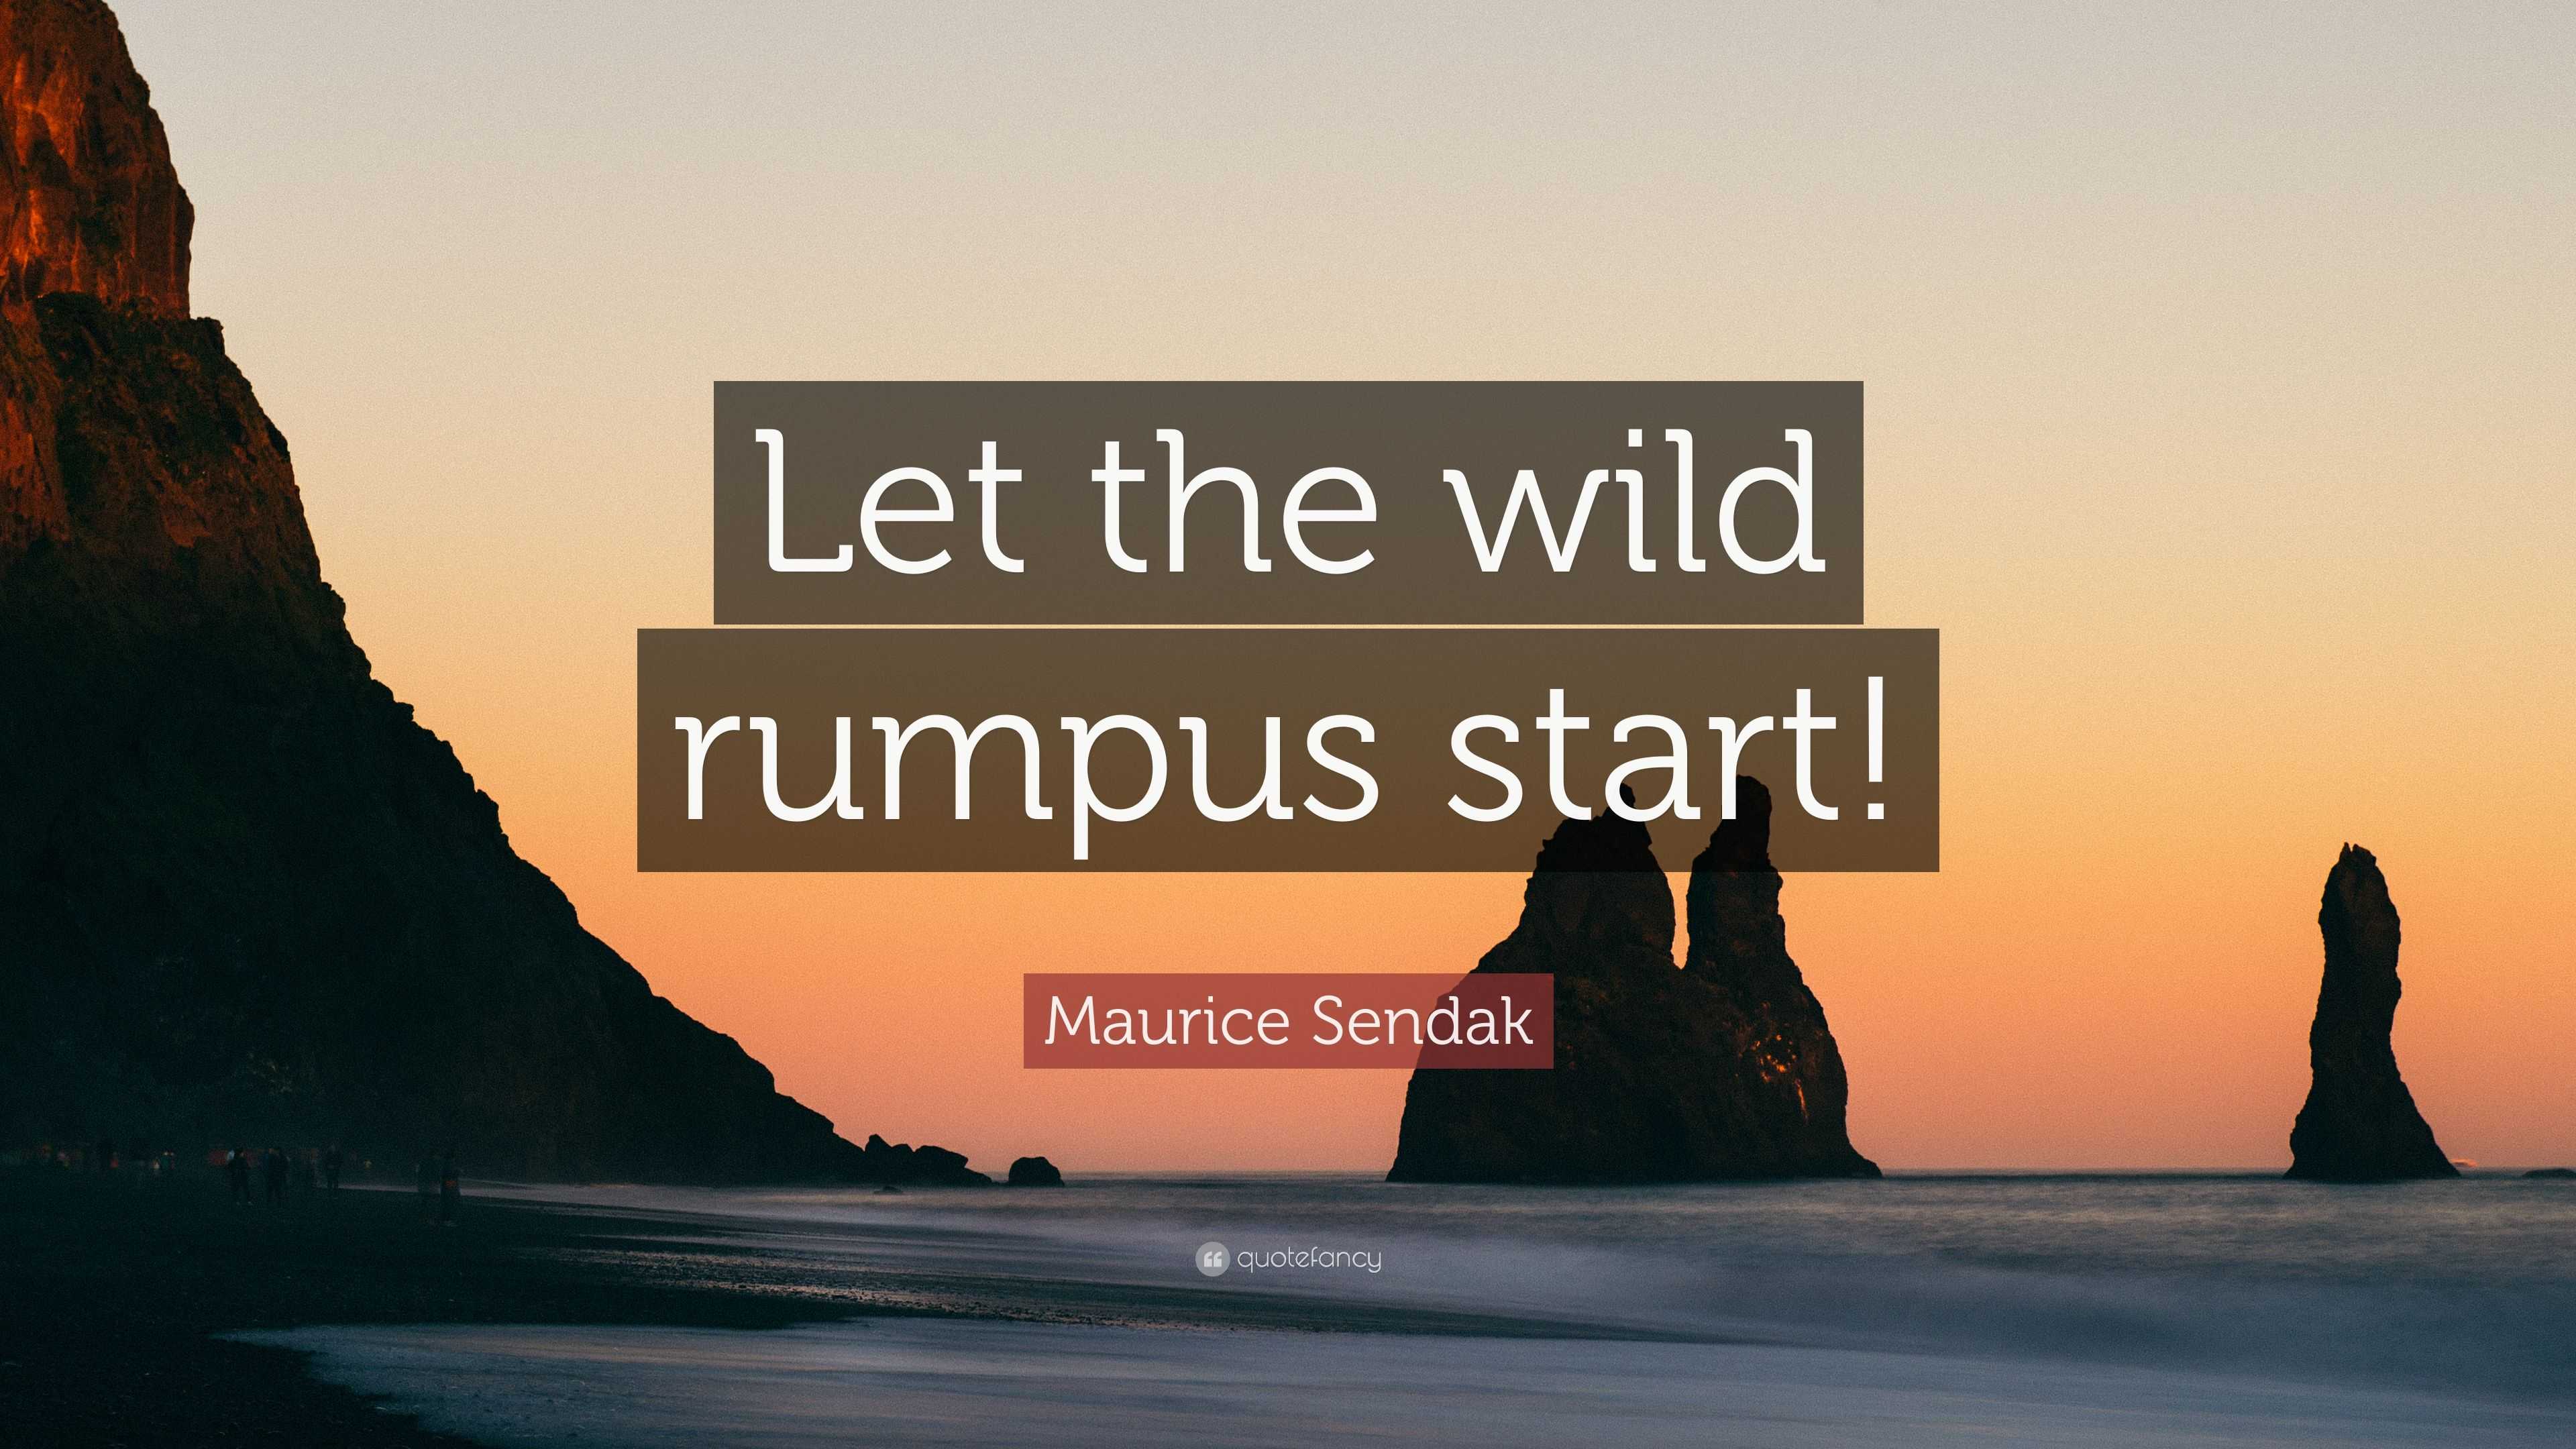 let the wild rumpus start meaning